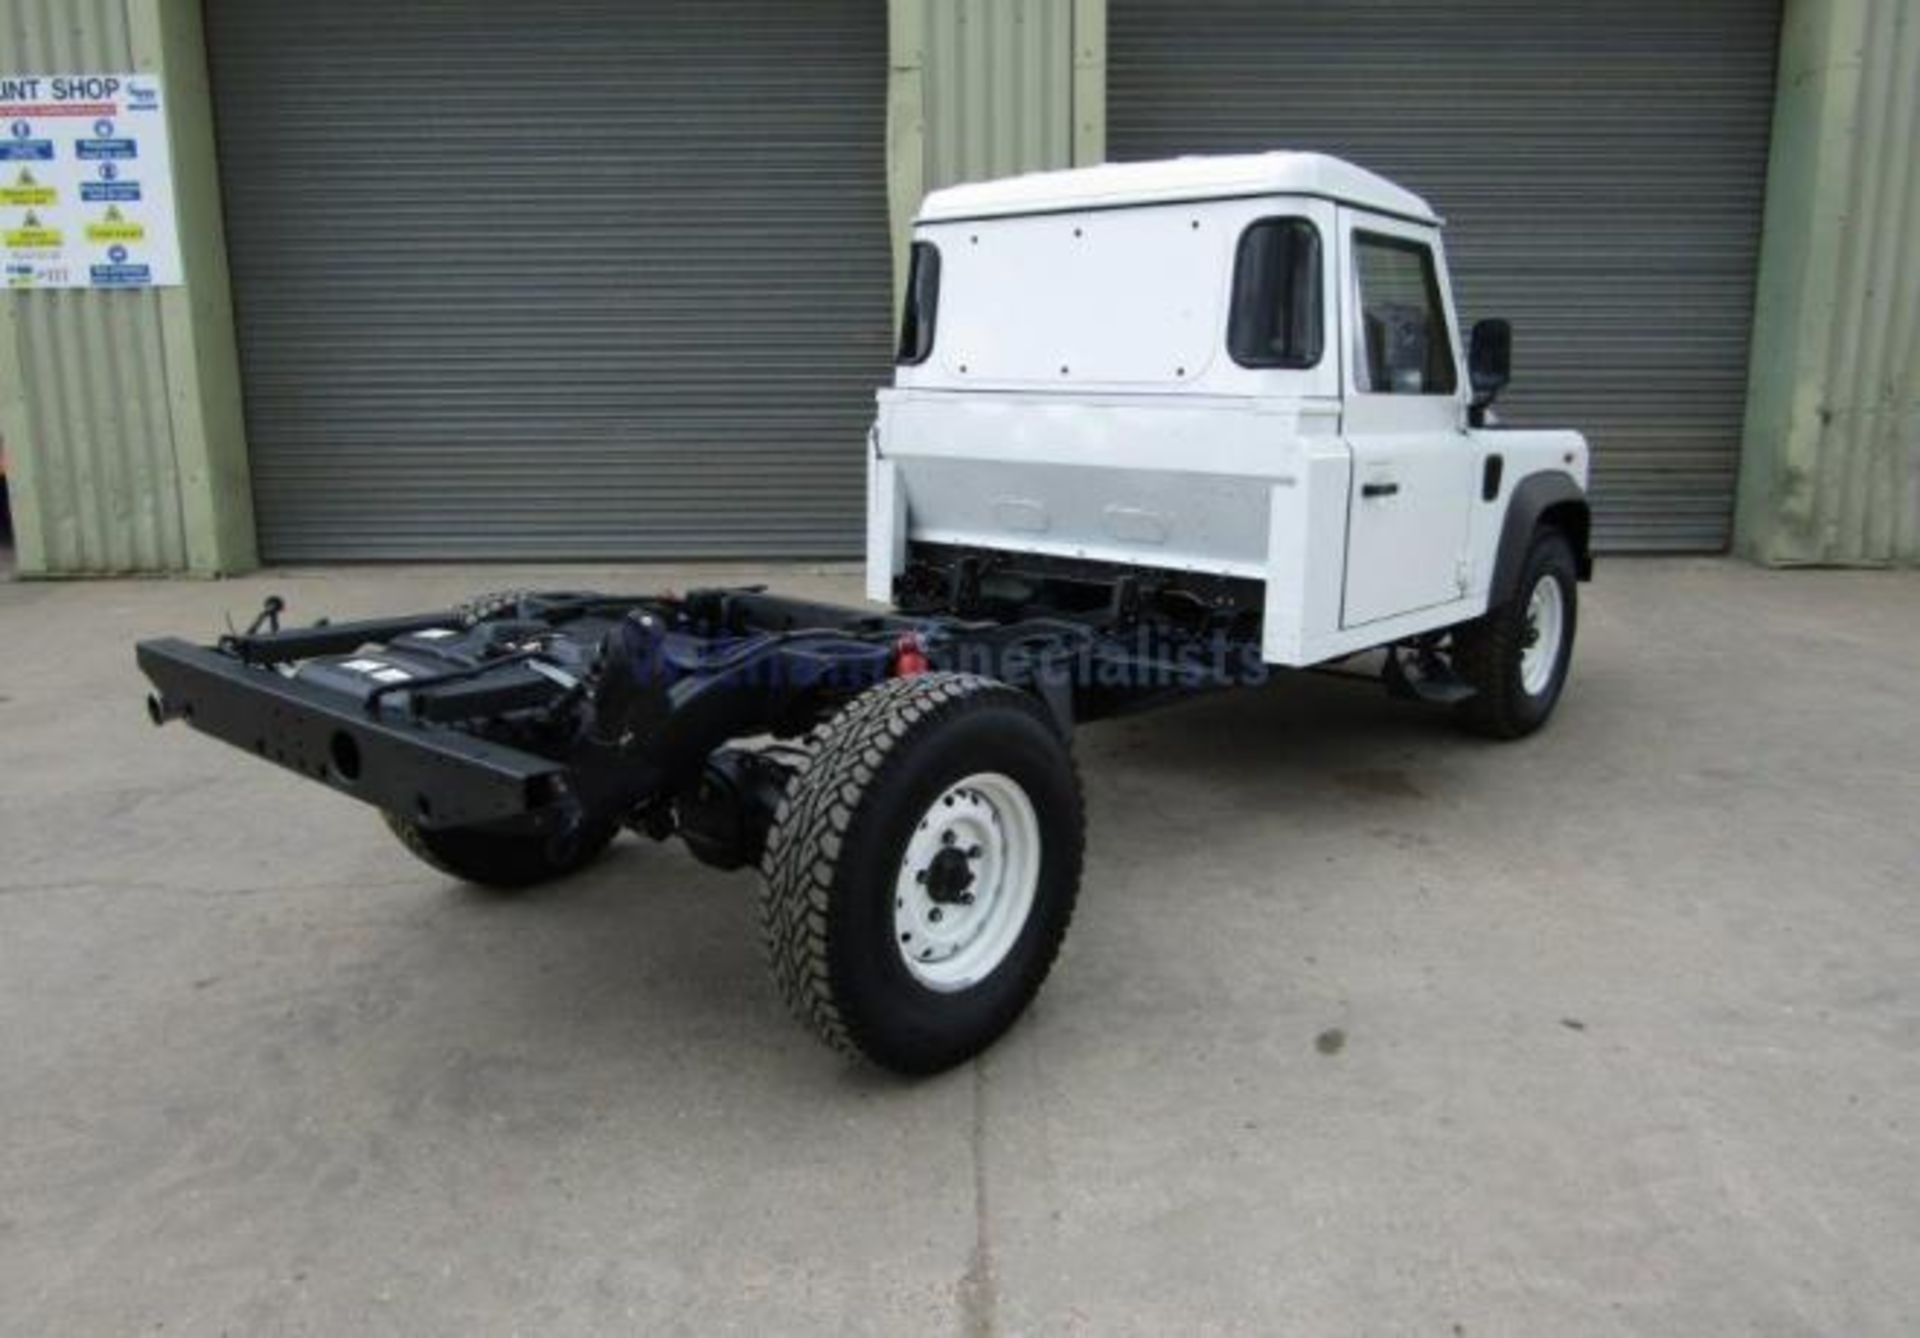 New Unused Export Specification Land Rover Defender Armoured 130 Chassis Cab - Image 6 of 19